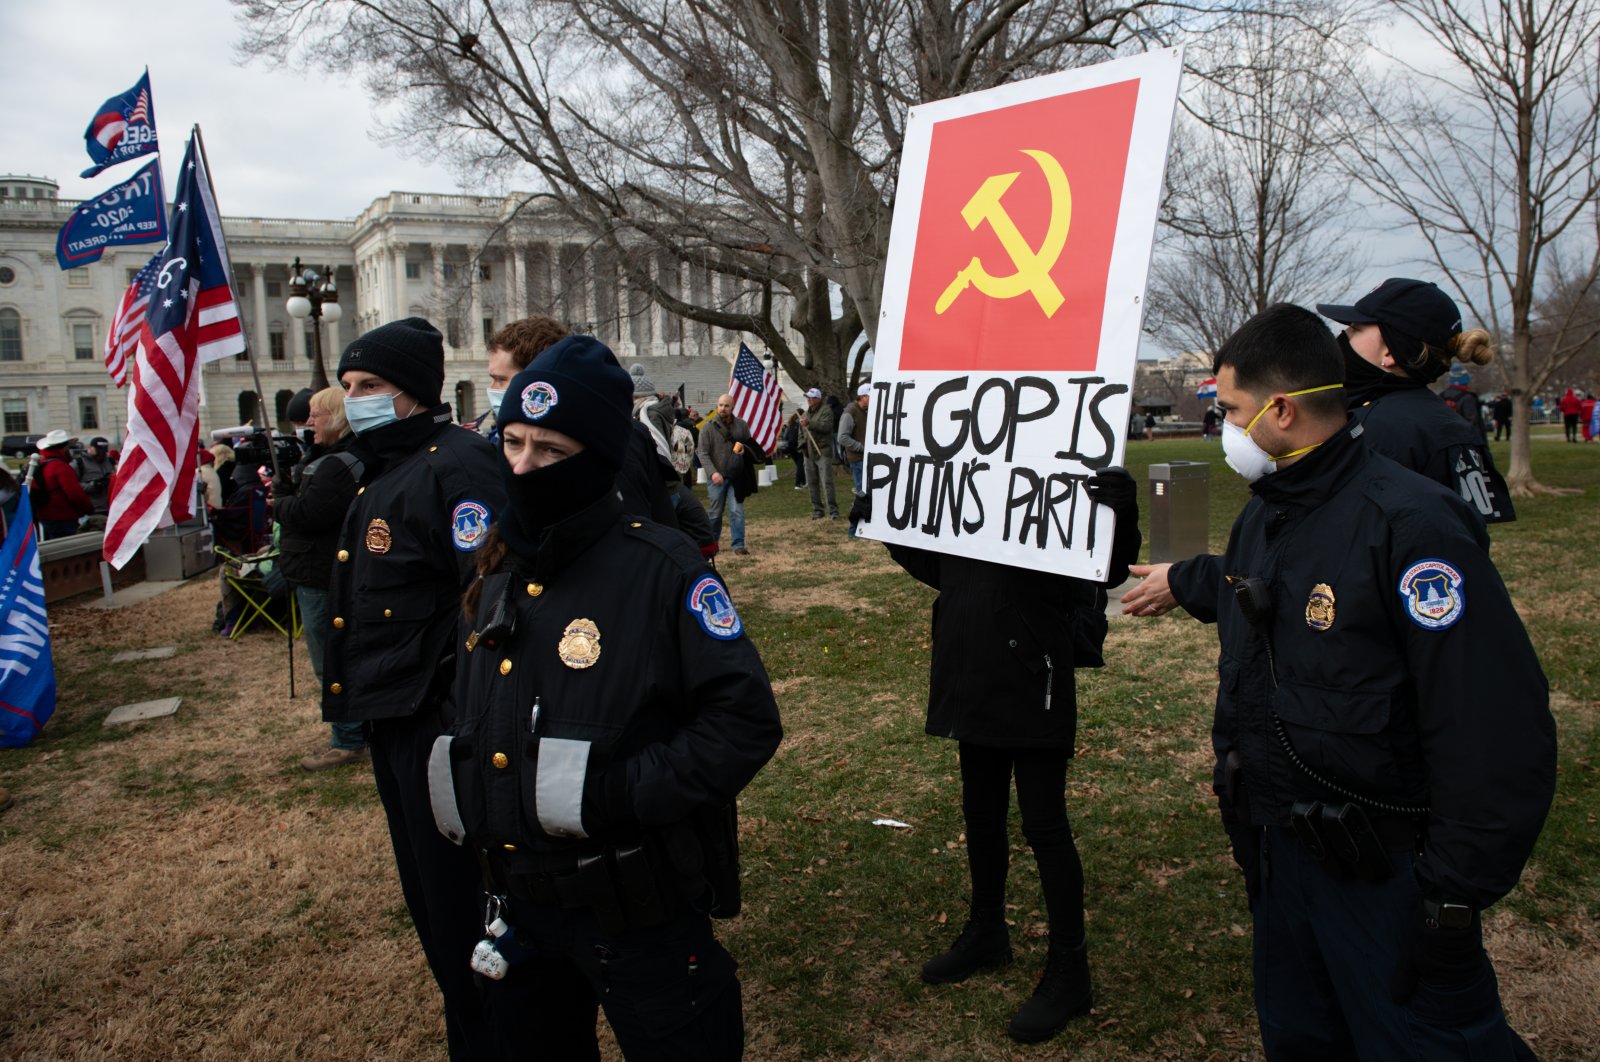 U.S. Capitol police officers surround a demonstrator holding a sign reading "The GOP Is Putin's Party" during a protest outside of the U.S. Capitol, Washington, D.C., U.S., Jan. 6, 2021. (Photo by Getty Images)